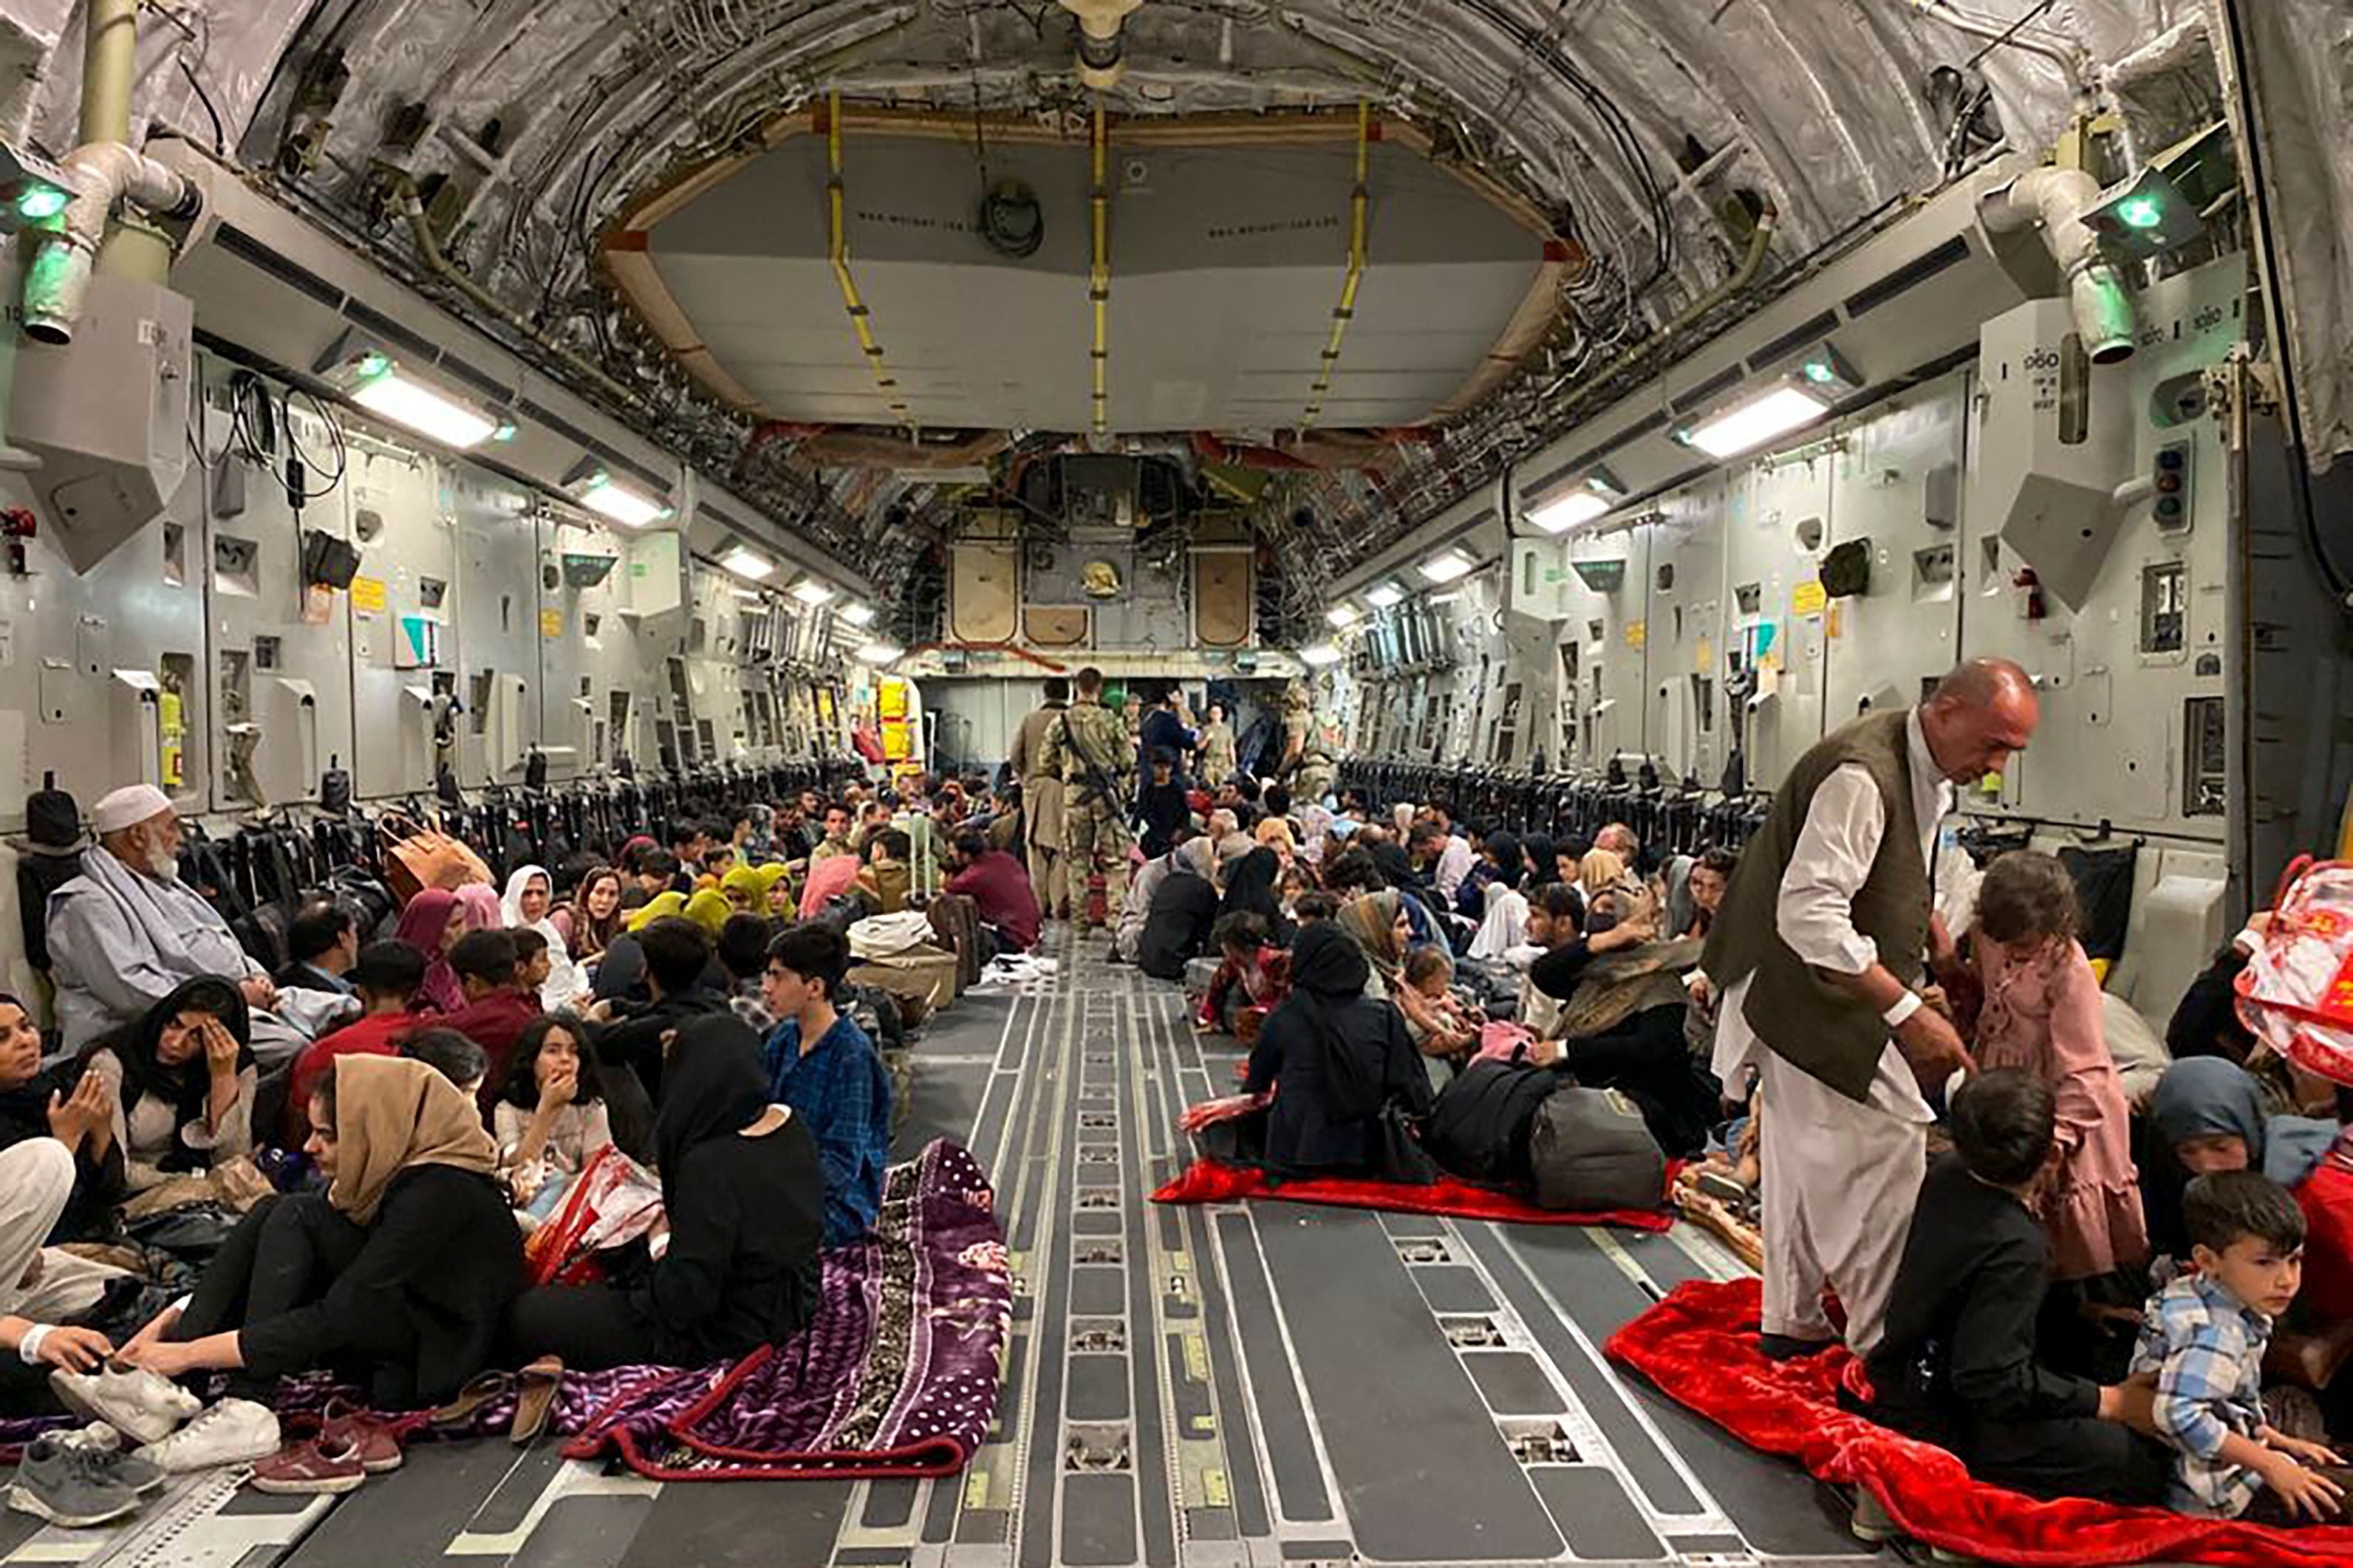 Afghan people sit inside a US military aircraft to leave Afghanistan after the Taliban takeover